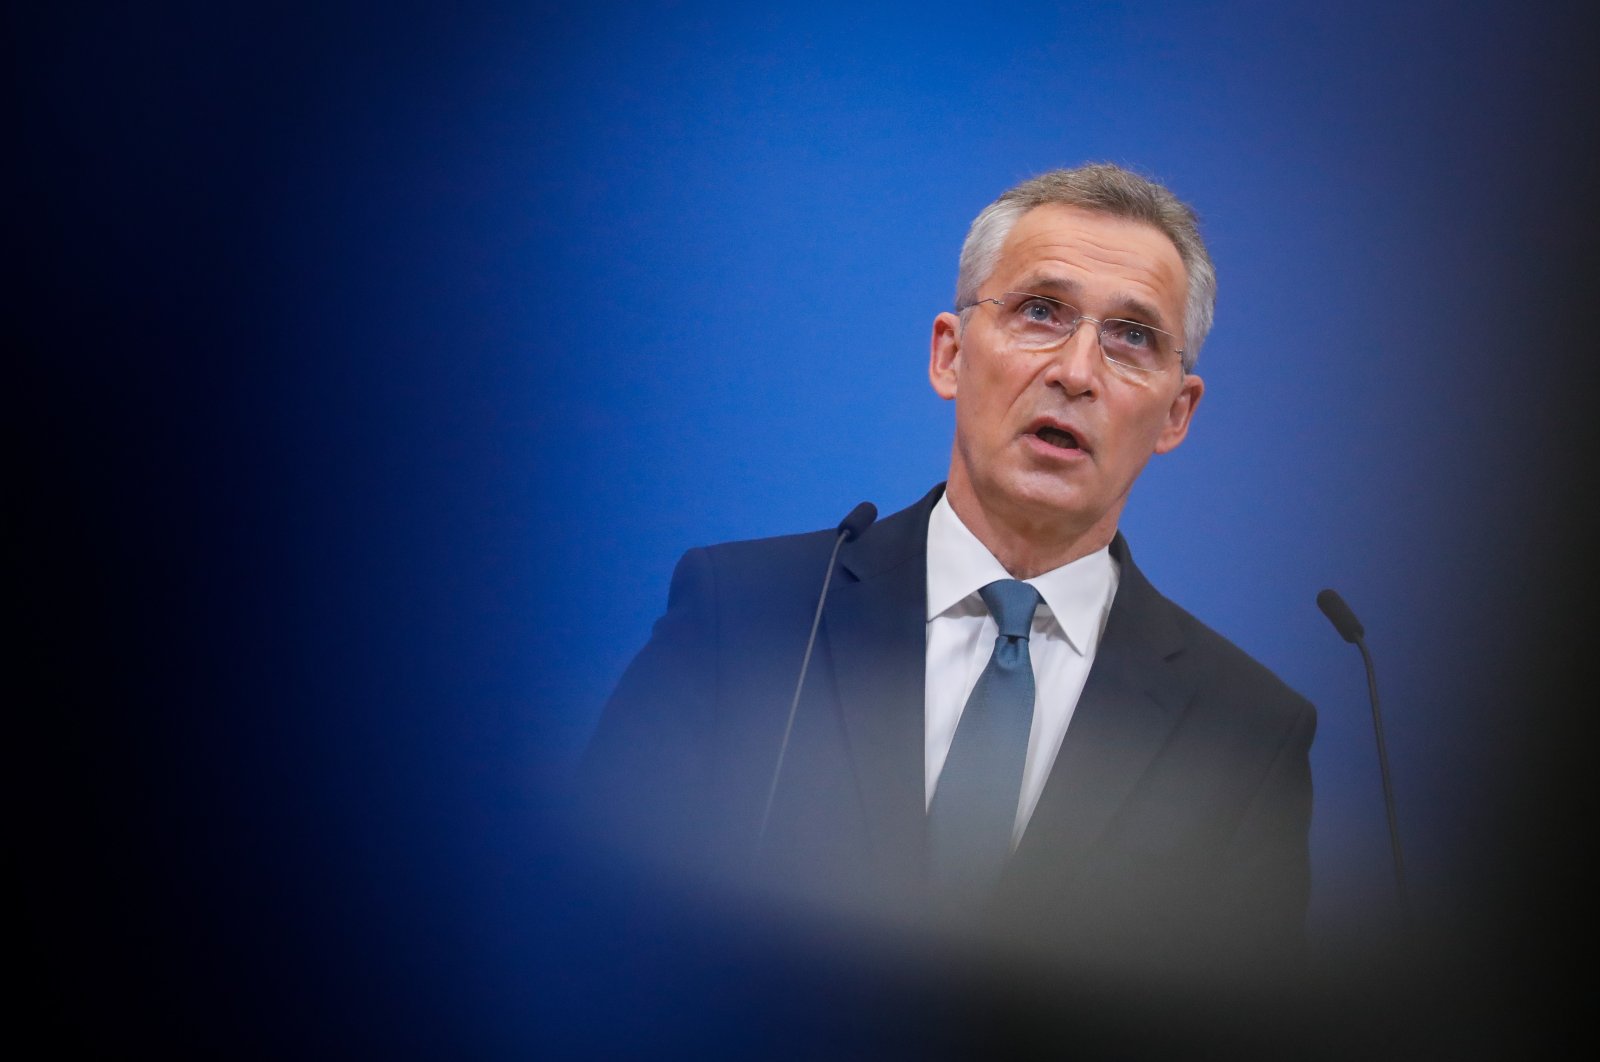 NATO Secretary-General Jens Stoltenberg gives a press conference at the end of a two-day meeting of NATO Ministers of Defense at the NATO headquarters in Brussels, Belgium, Feb. 17, 2022. (EPA Photo)